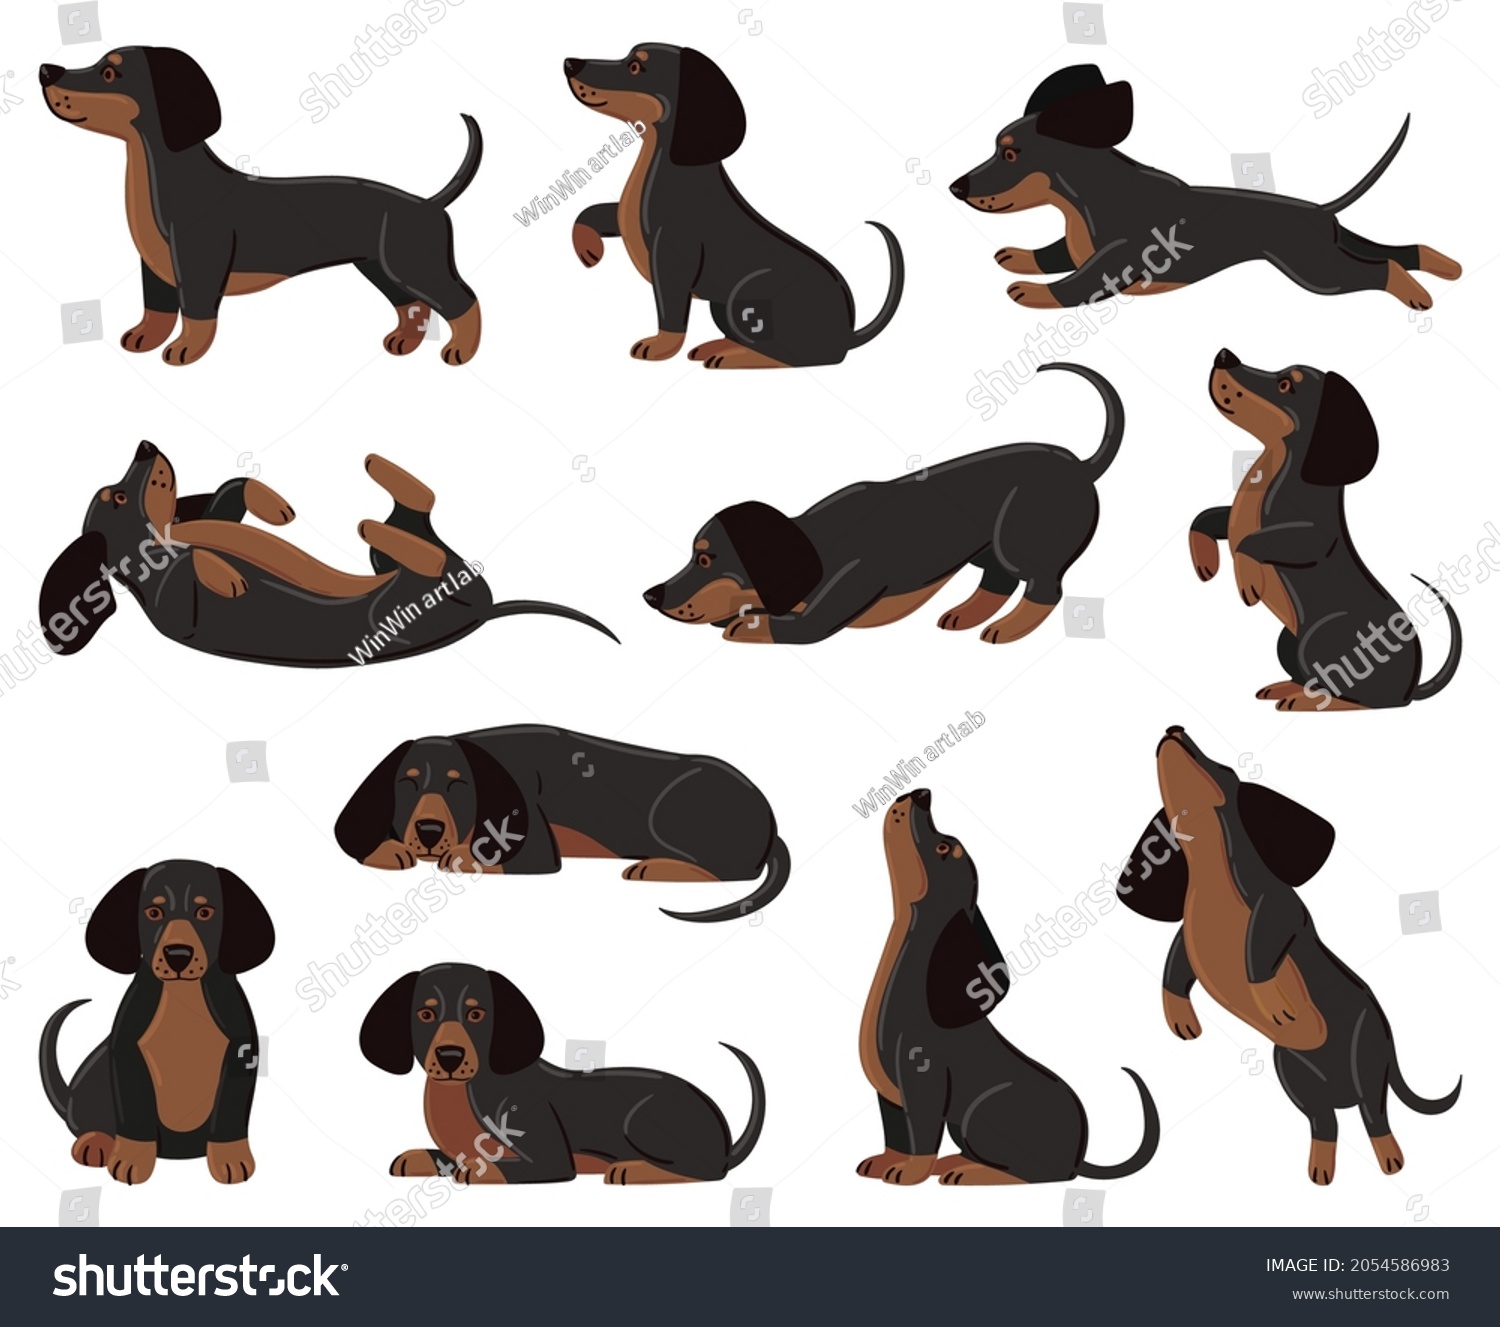 SVG of Cute cartoon dachshund dog breed in various poses. Dachshund adorable character sleeping, walking, playing vector illustration set. Domestic dachshund pet. Dogs cartoon, pet puppy domestic svg